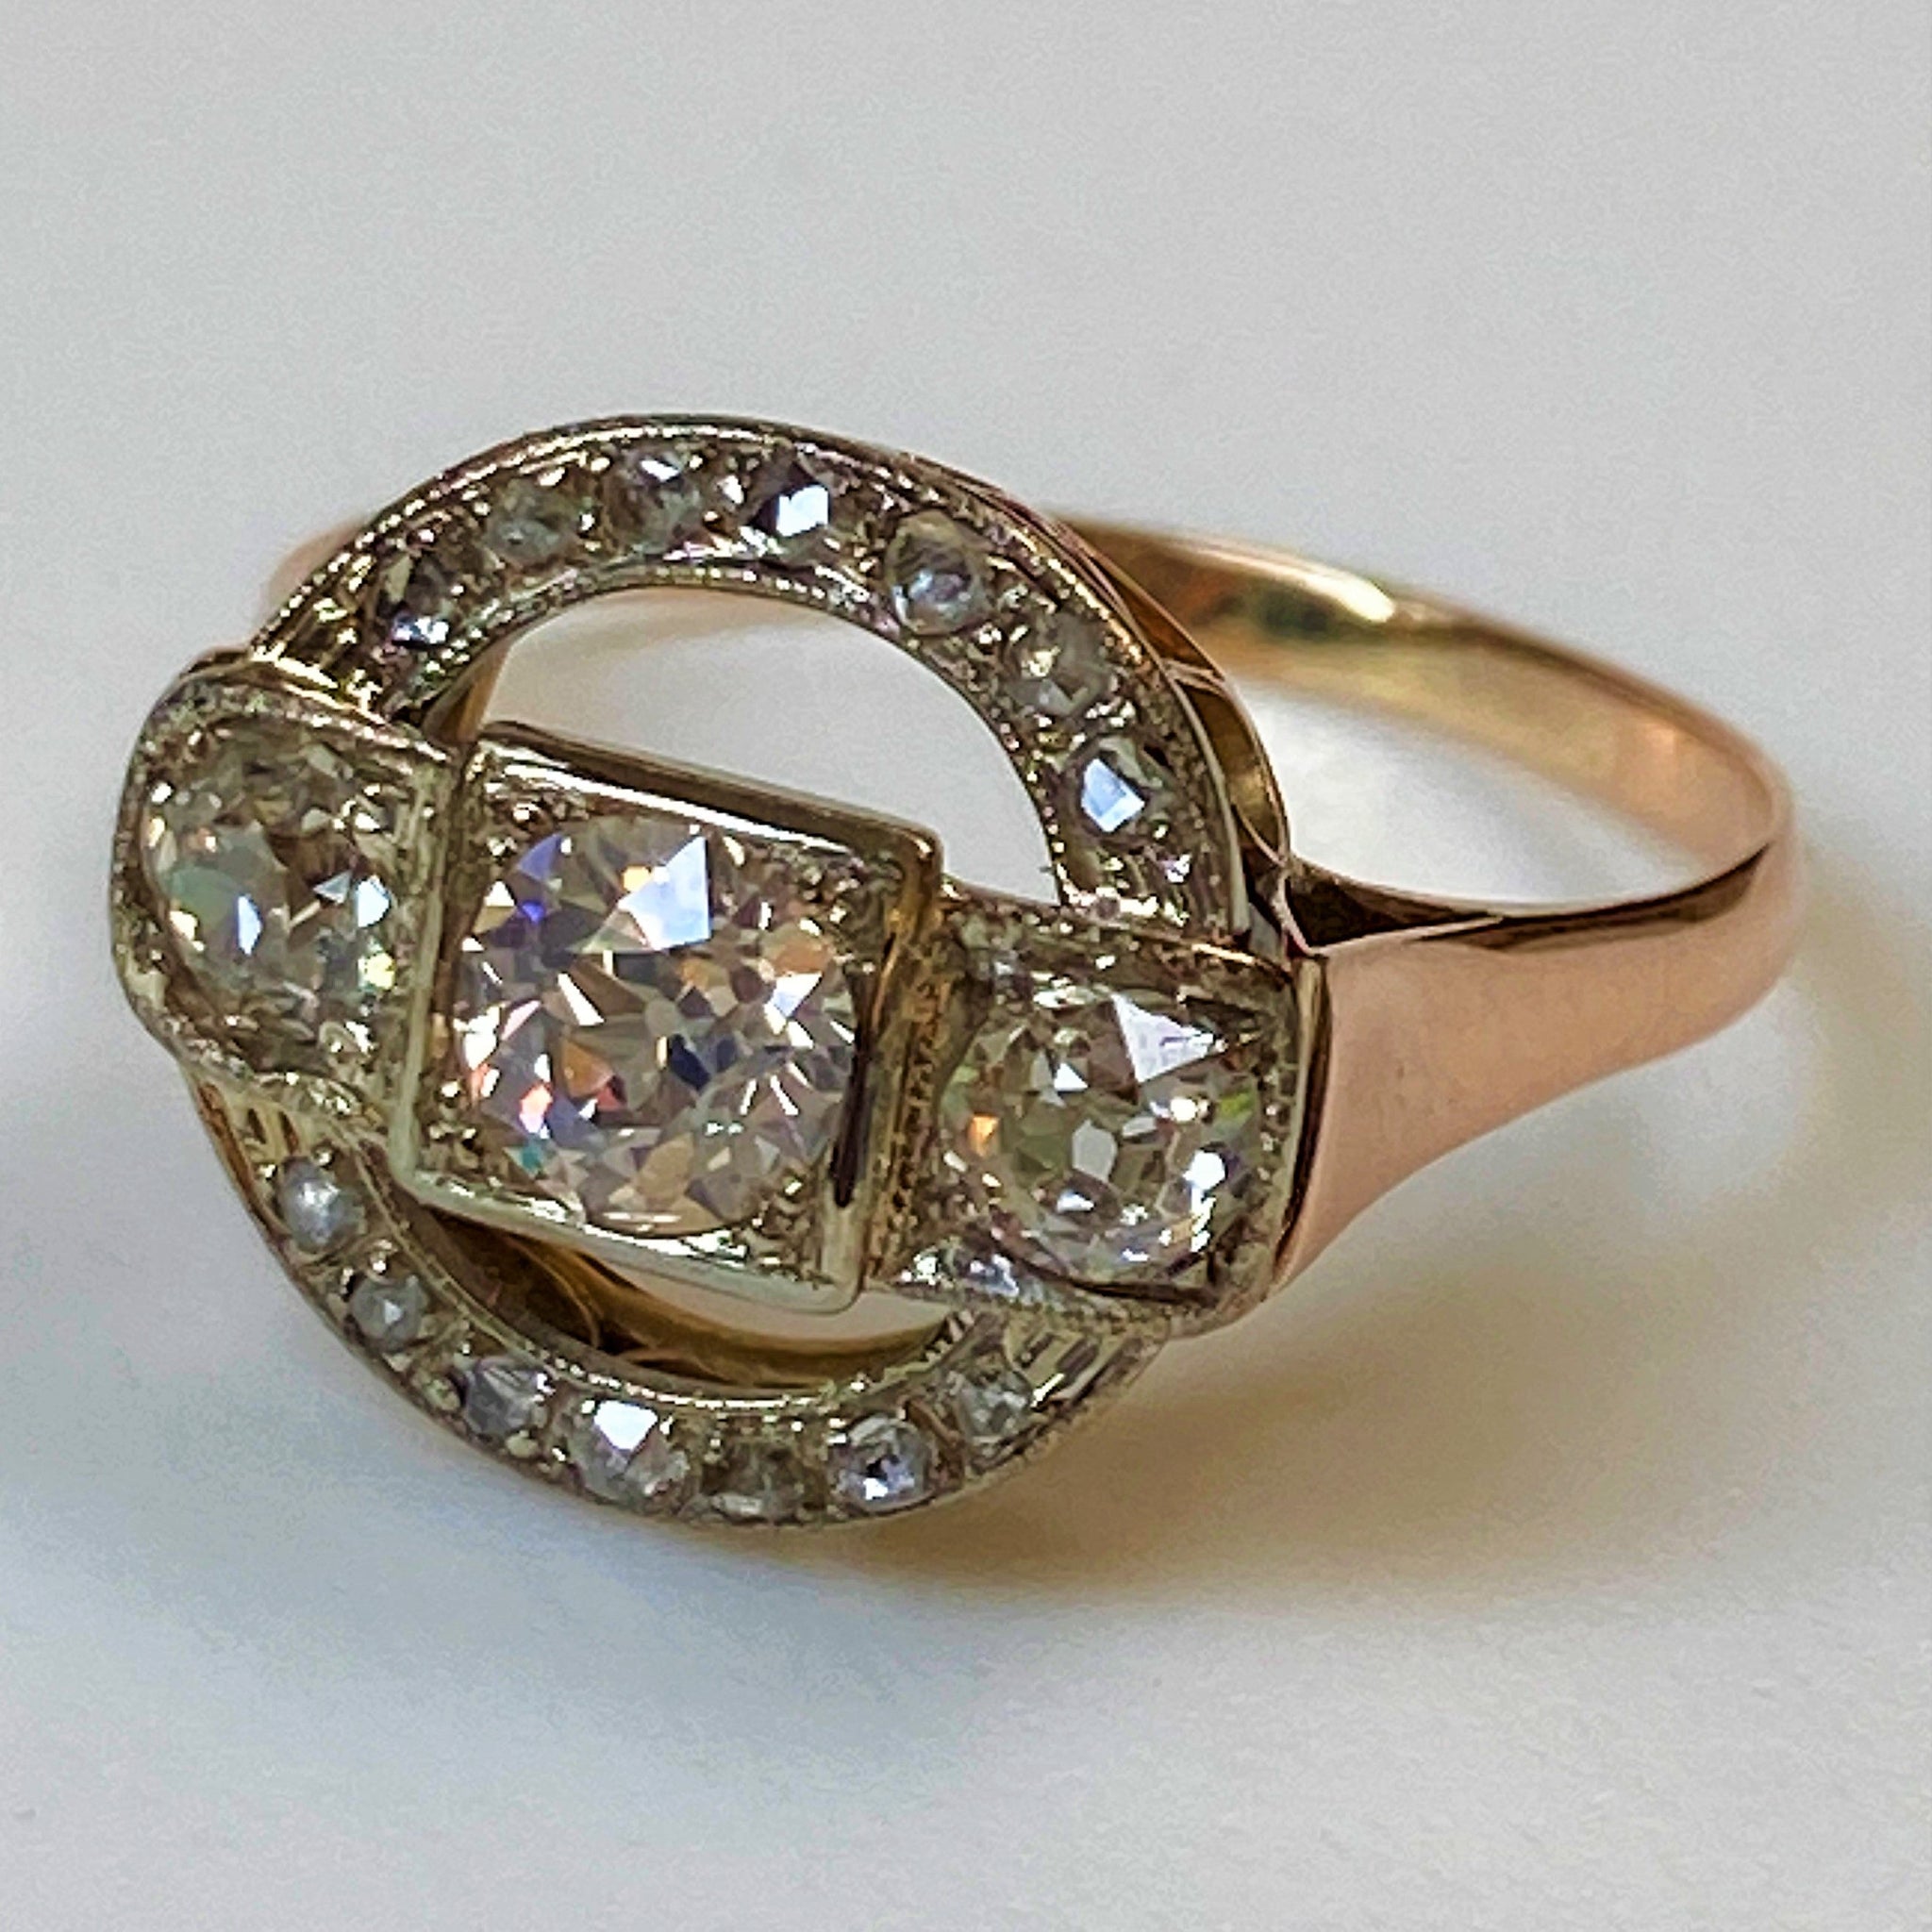 Antique 14ct Rose and White Gold, and Diamond Ring